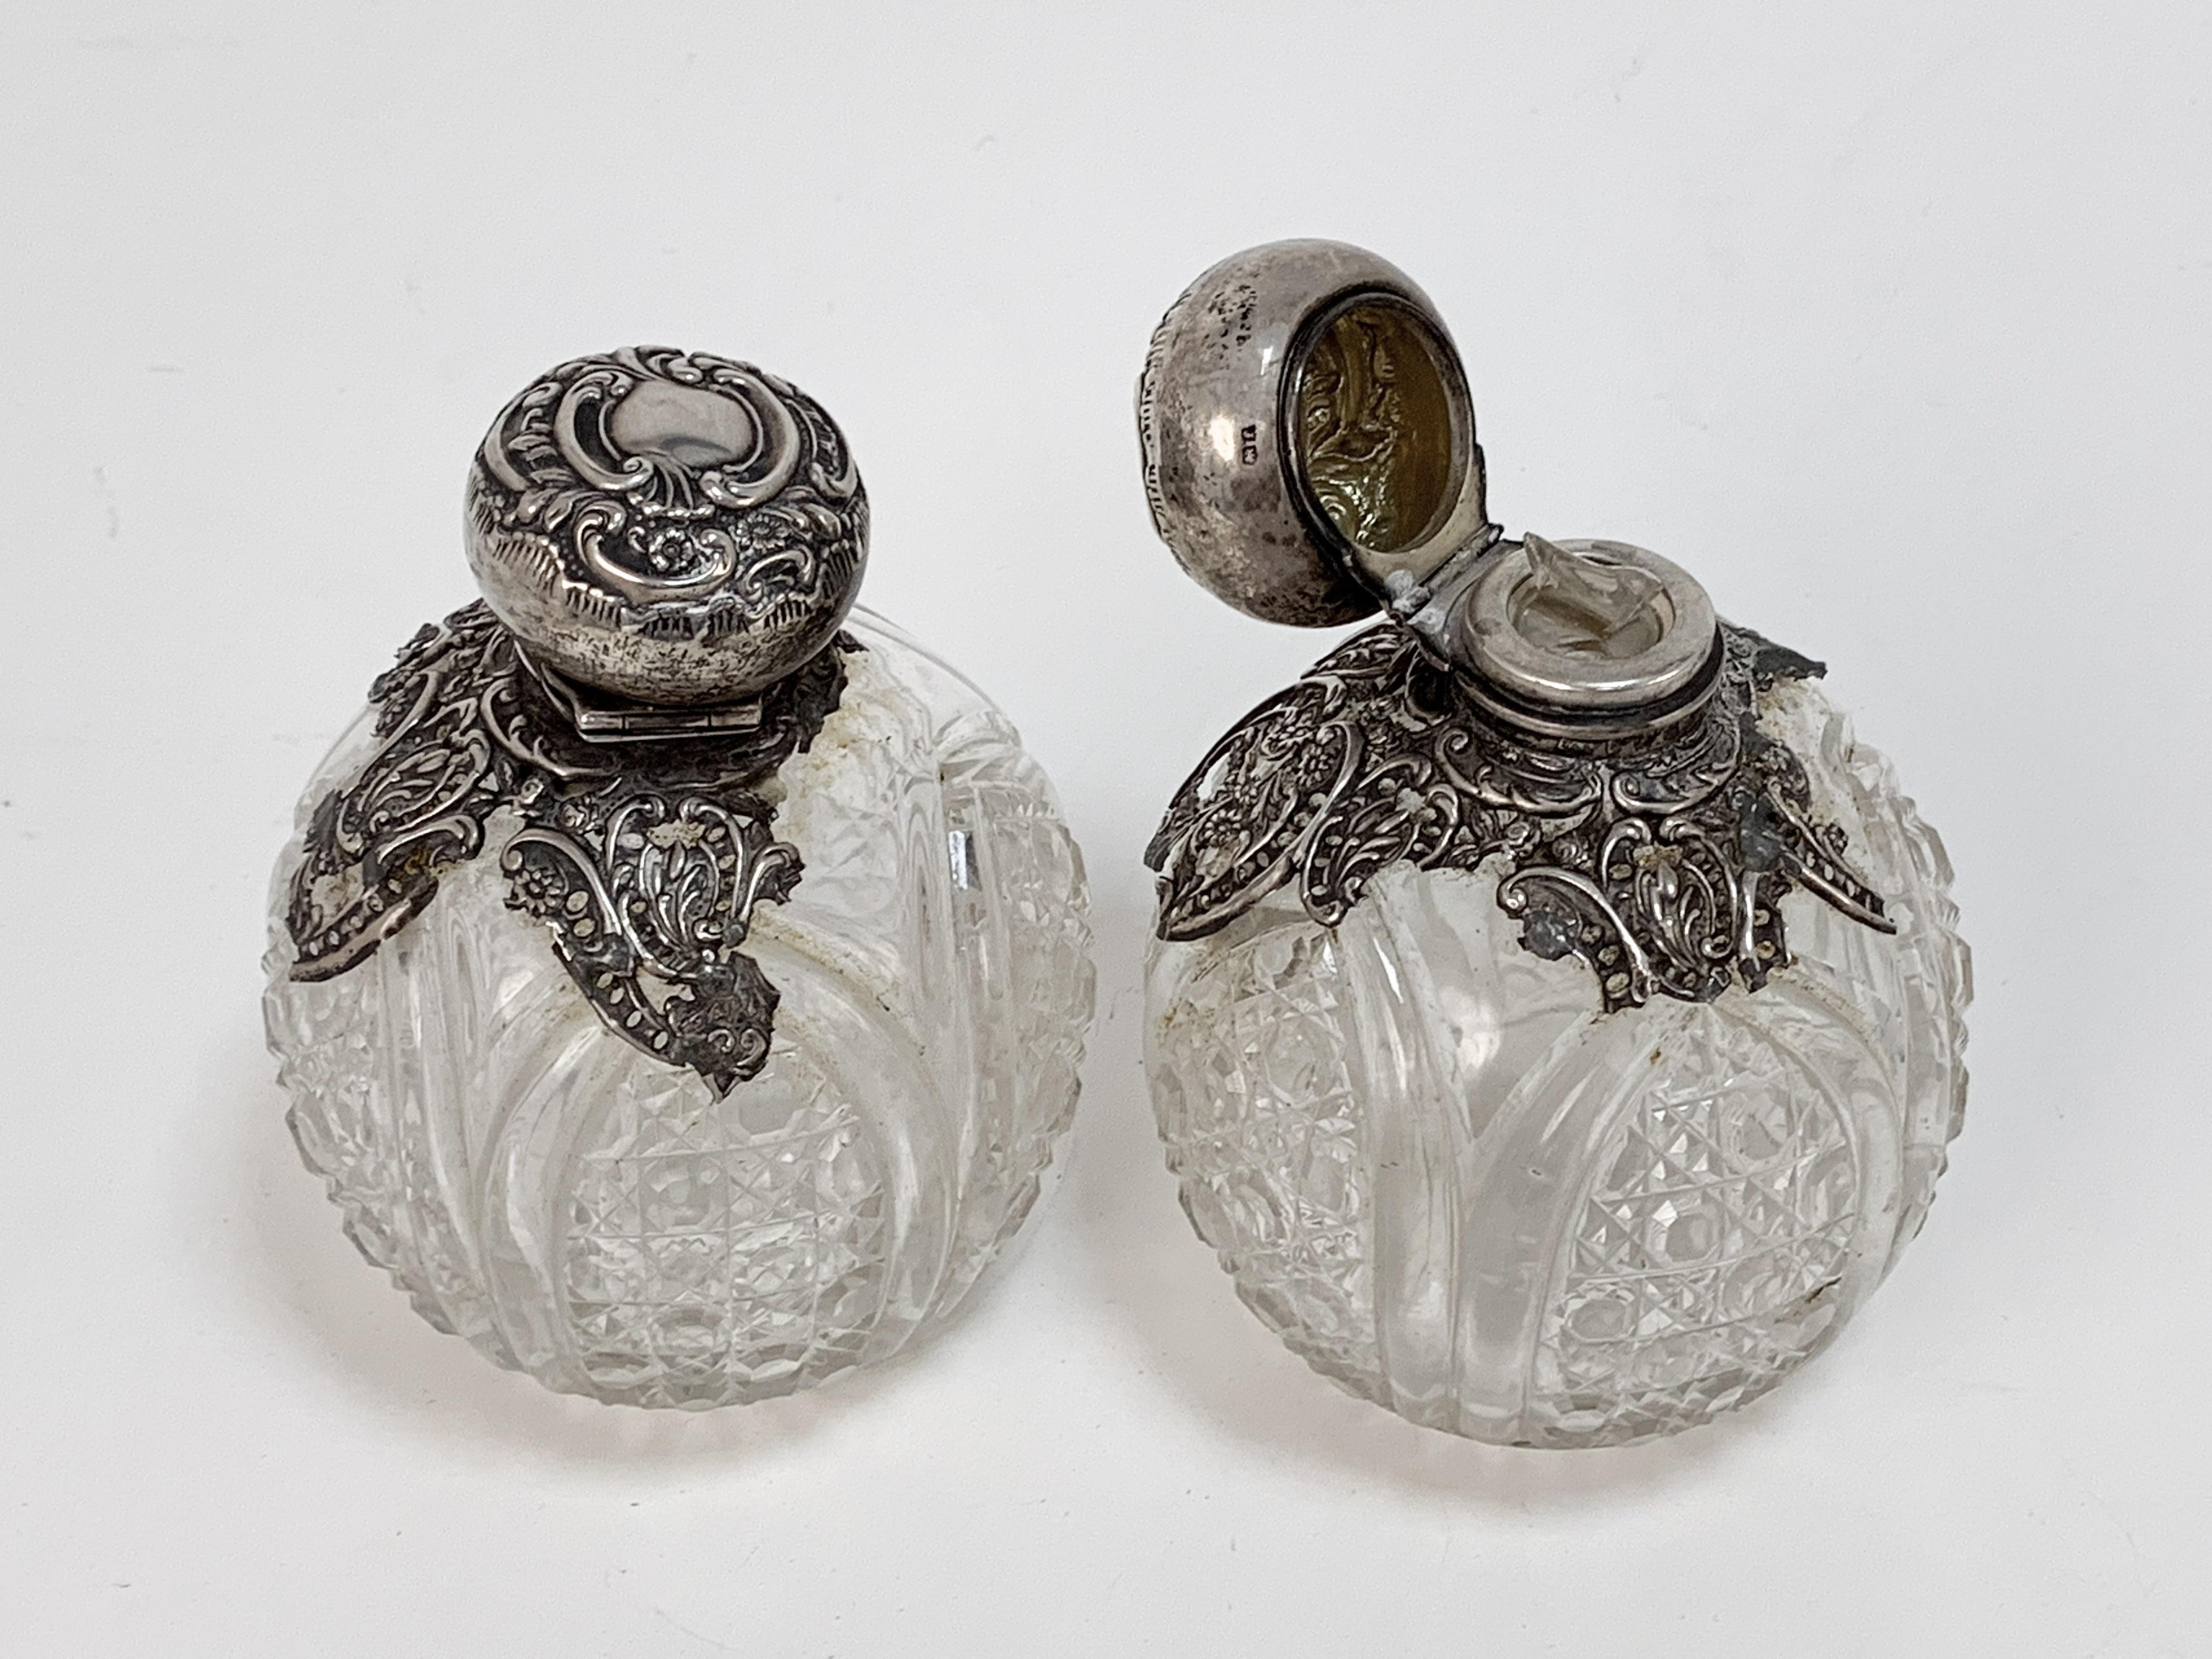 Pair of Antique Perfume Bottles, Sterling Silver and Crystal, England Early 1900 2